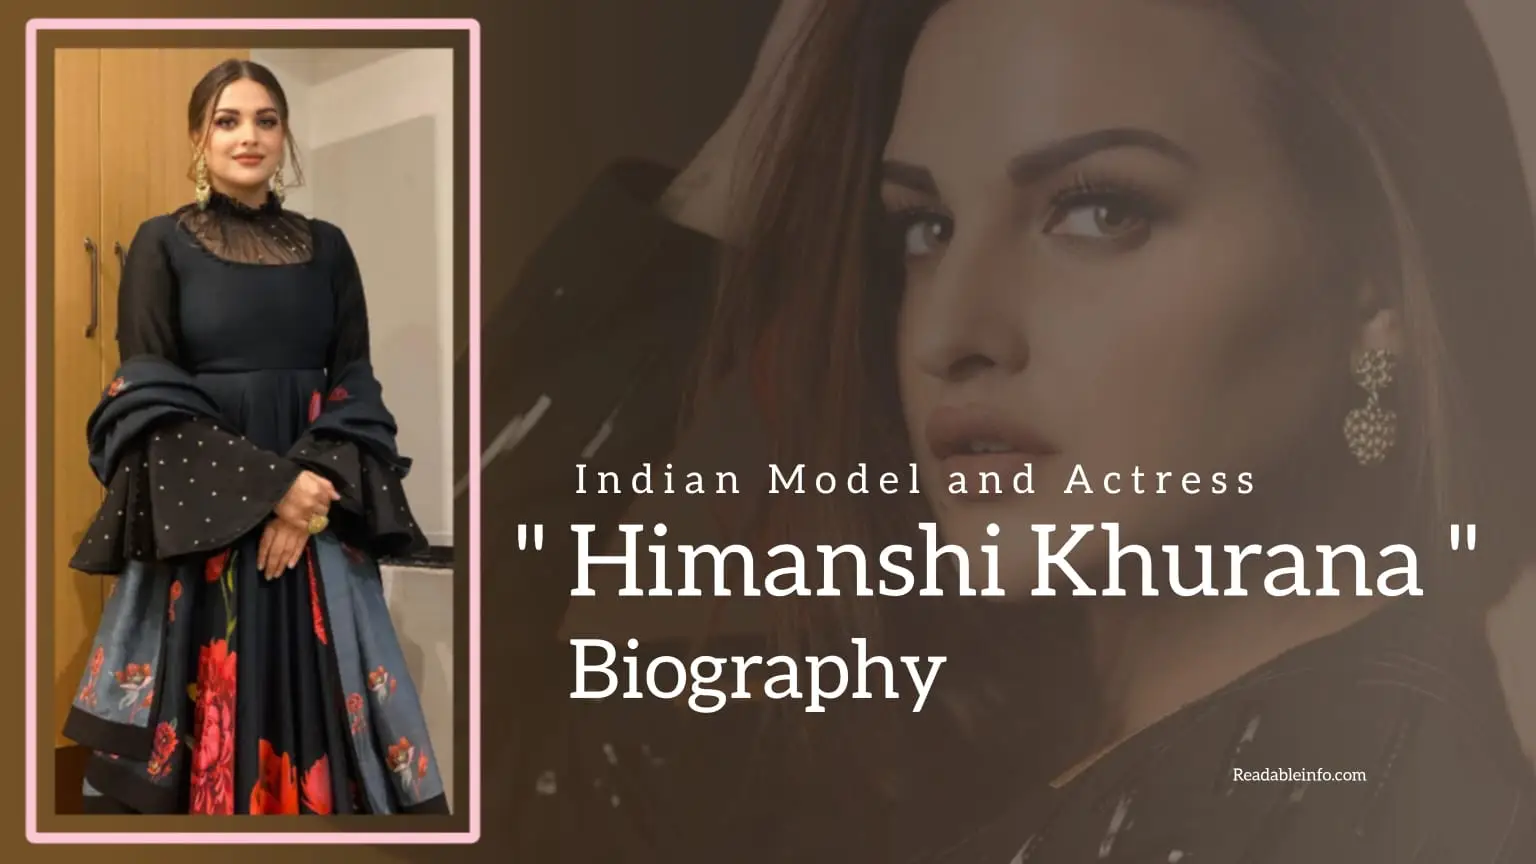 You are currently viewing Himanshi Khurana Biography (Indian Model And Actress)